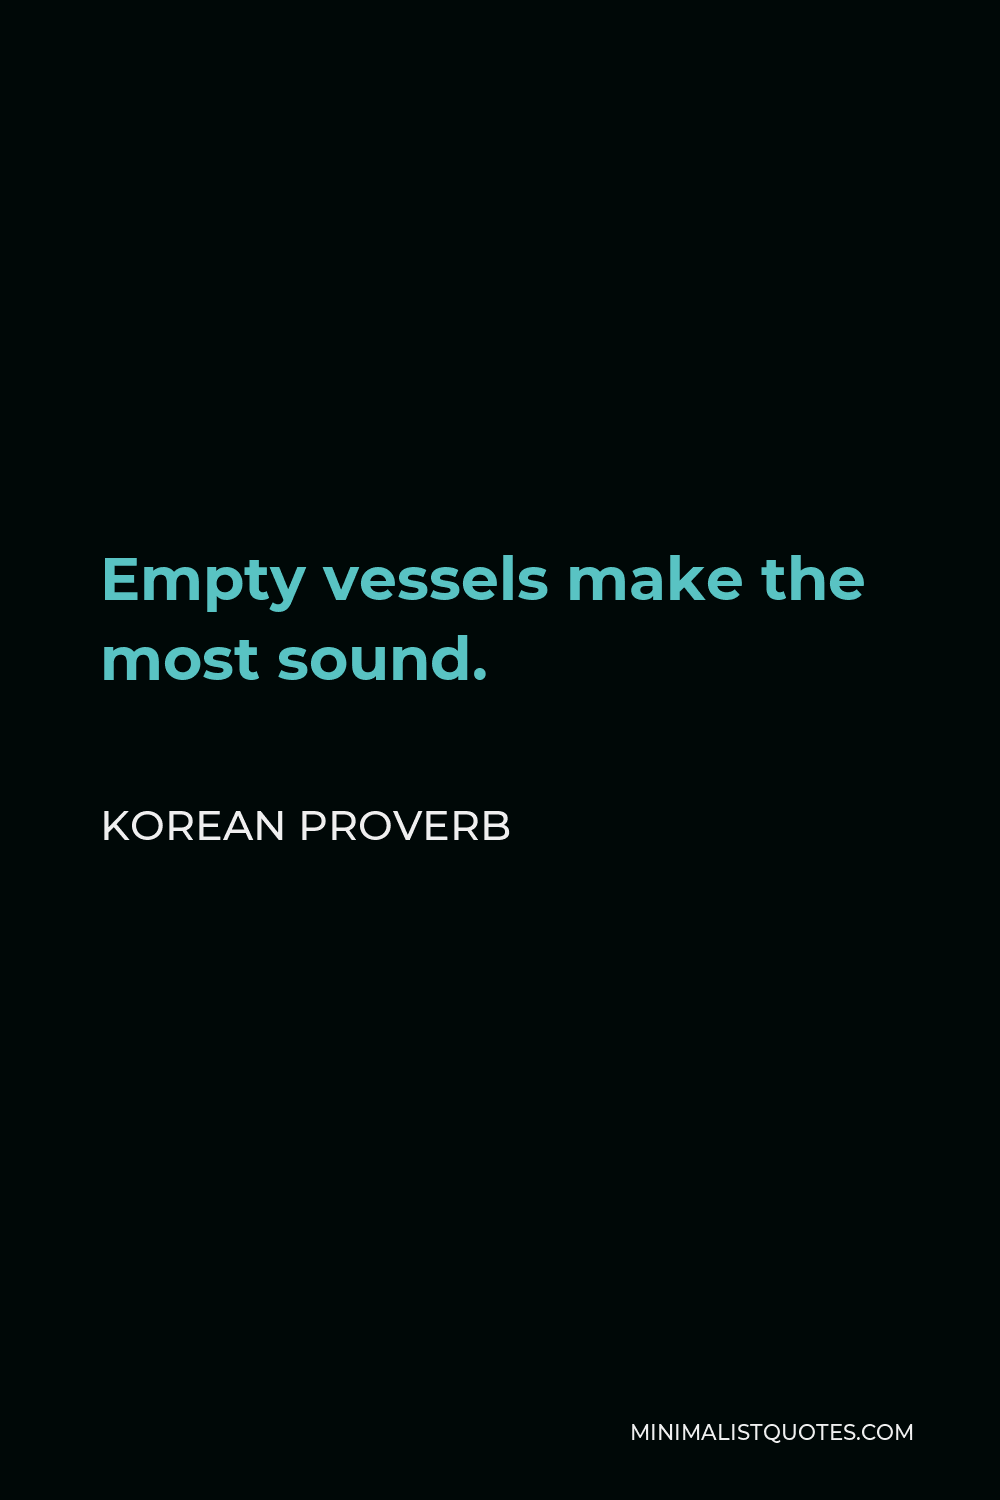 Korean Proverb Quote - Empty vessels make the most sound.